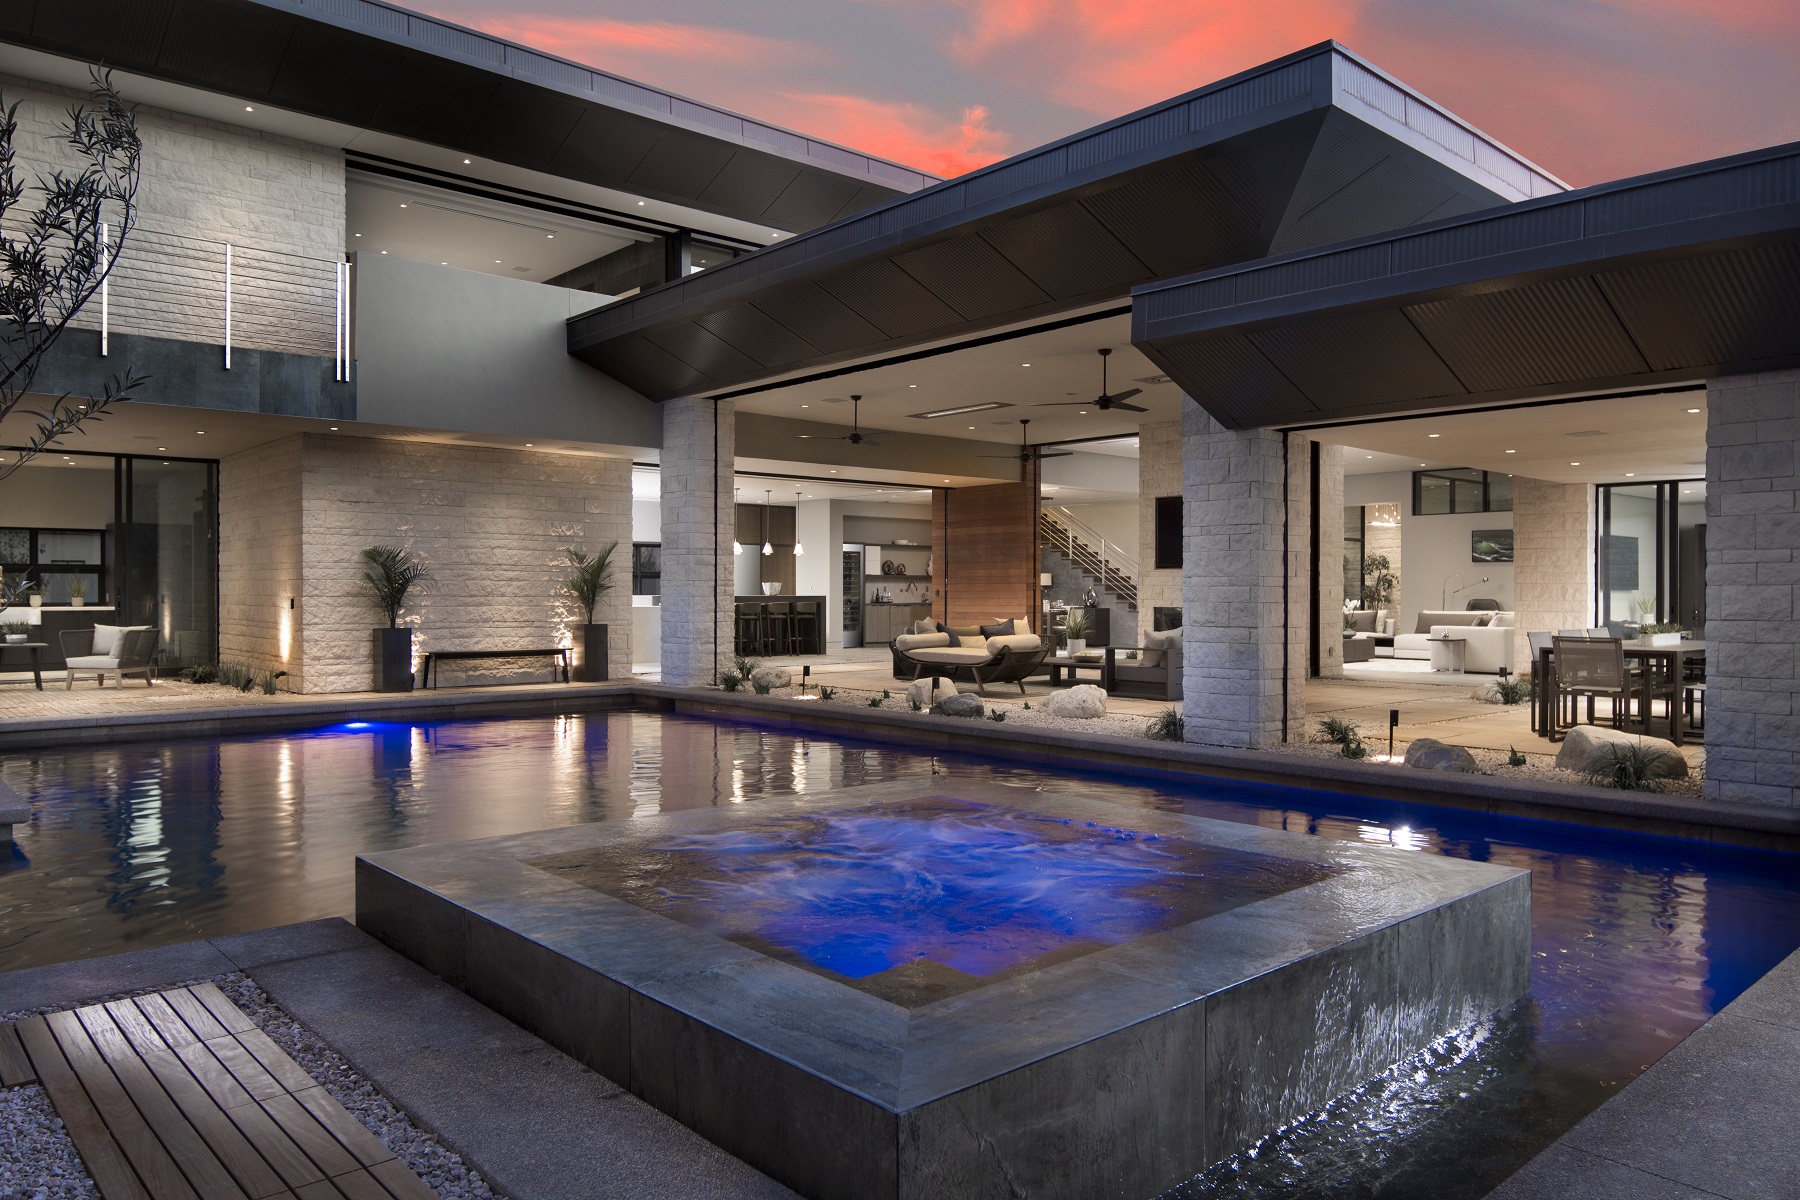 2019 The New American Remodel Pool and Spa